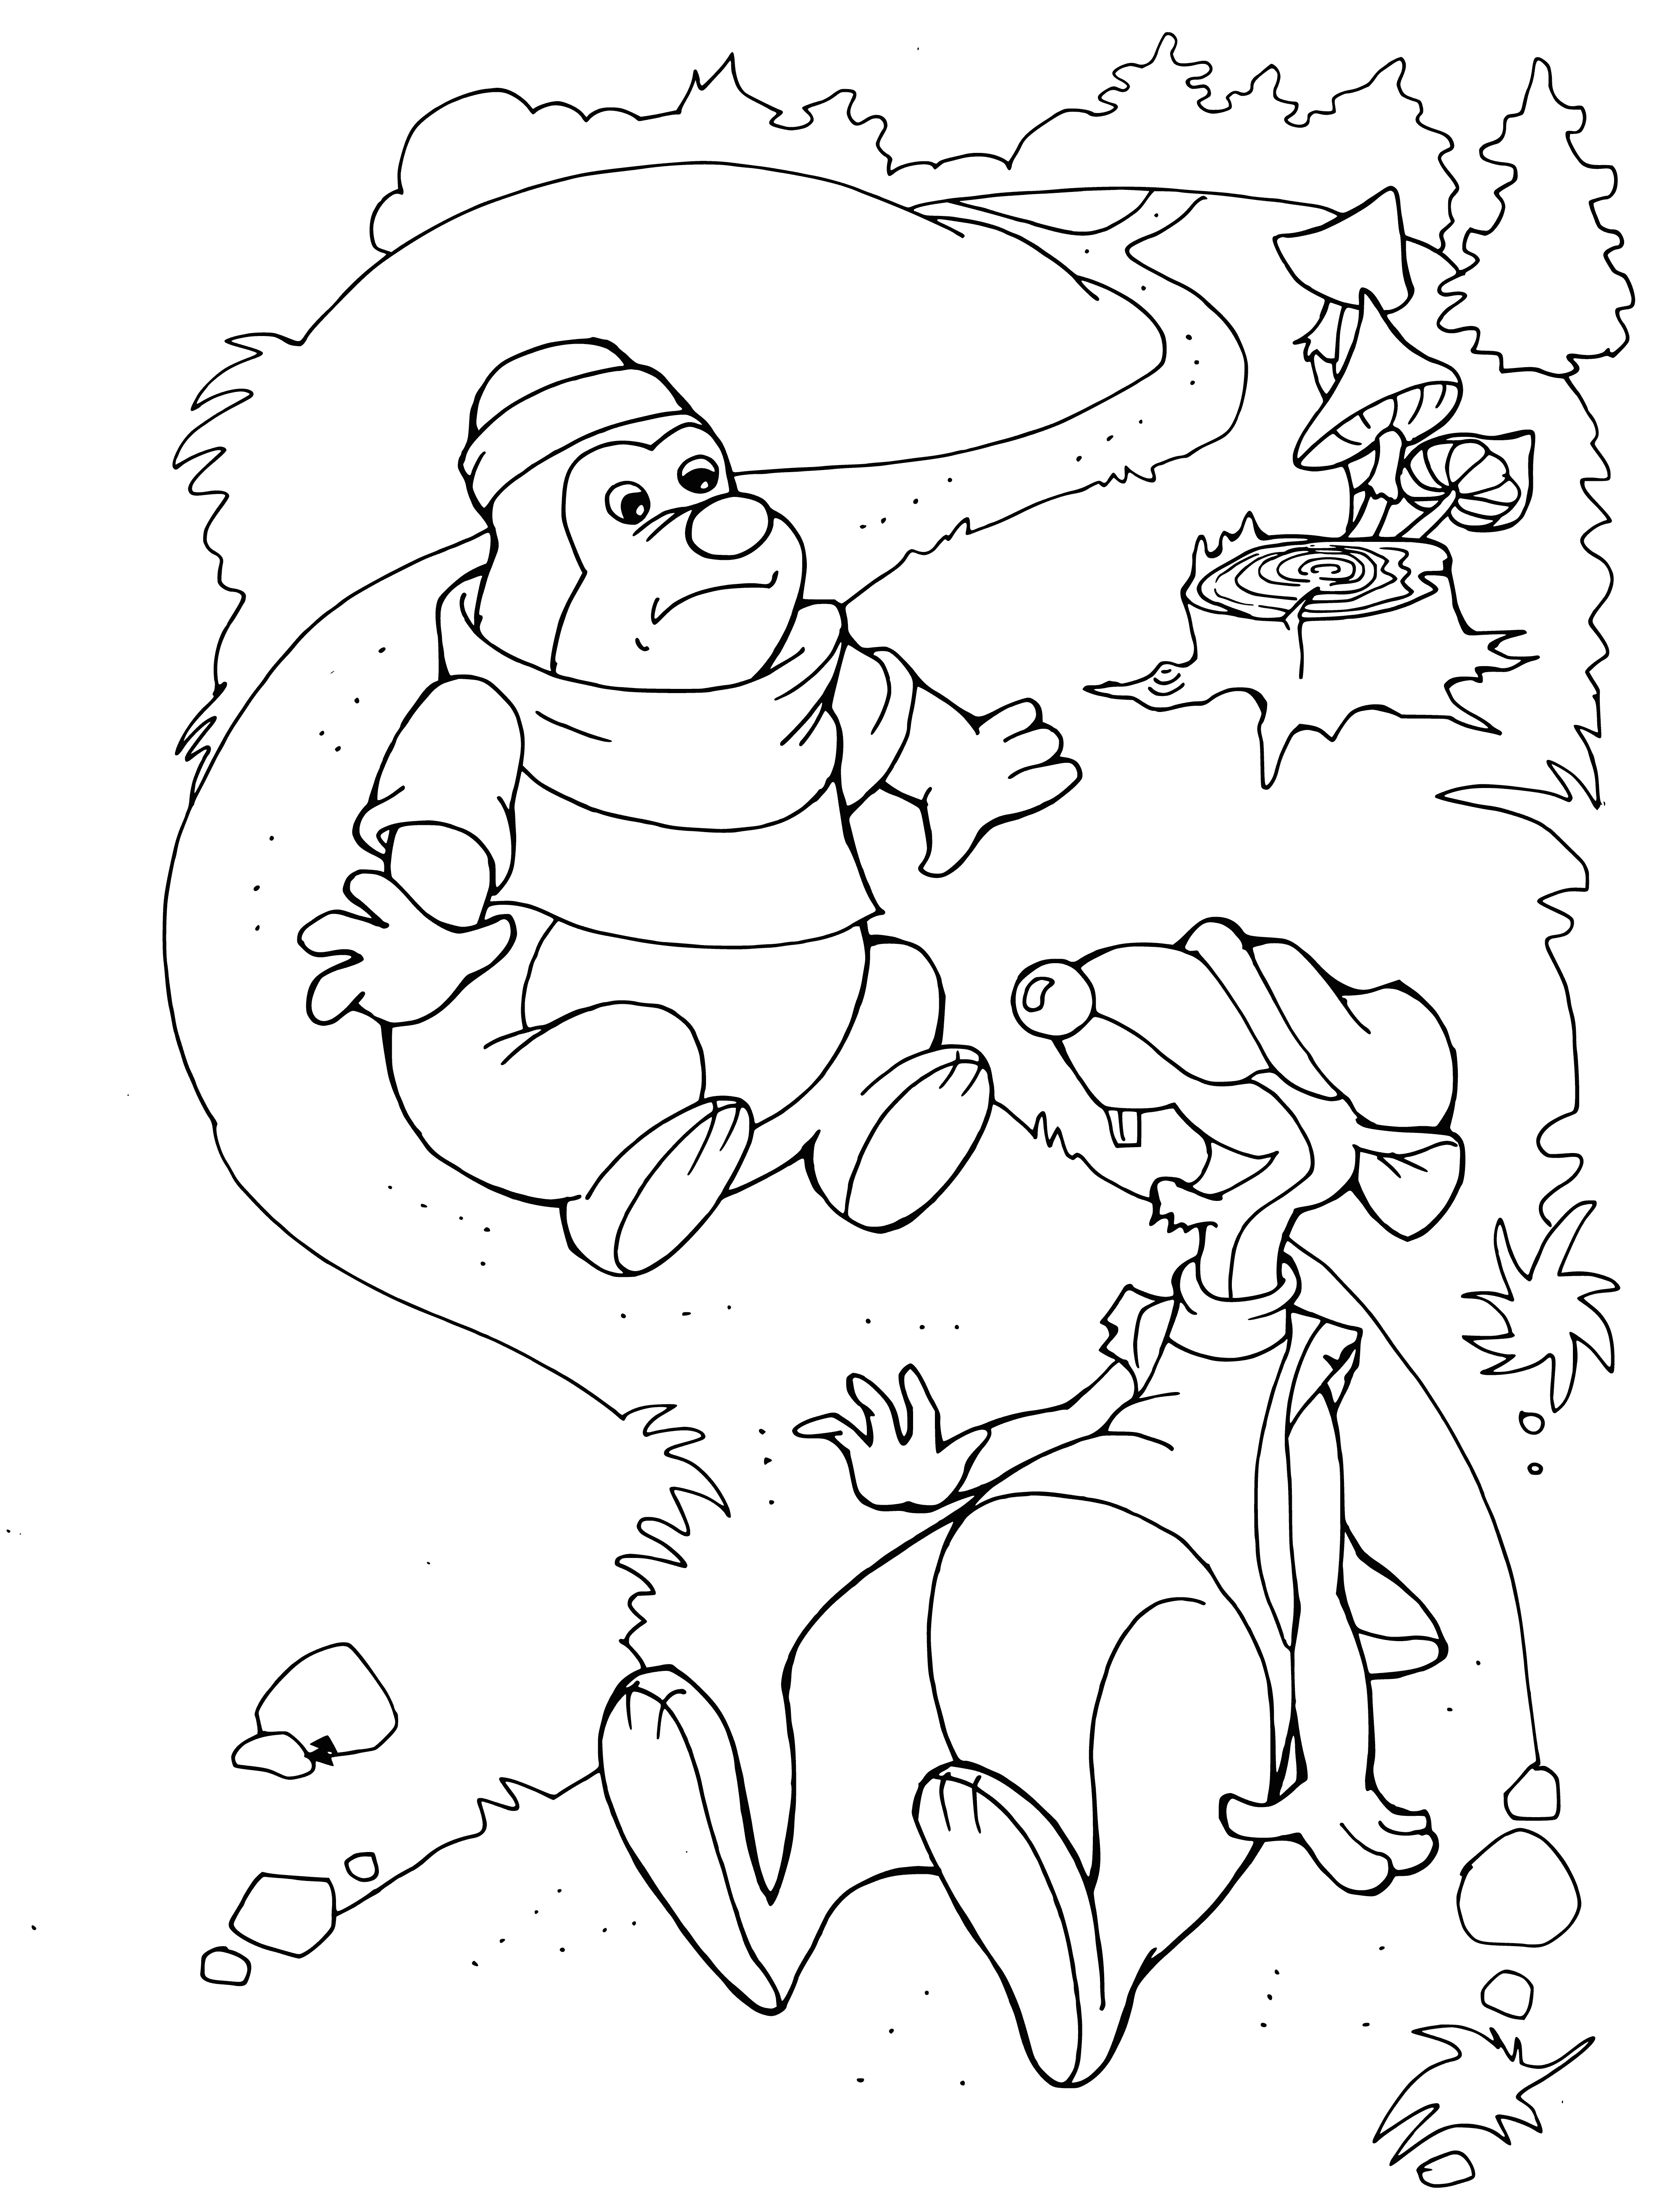 coloring page: Chip and Dale, Rescue Rangers, help animals in danger. In this color page they pull an orange cat from a tree. #RescueRangers